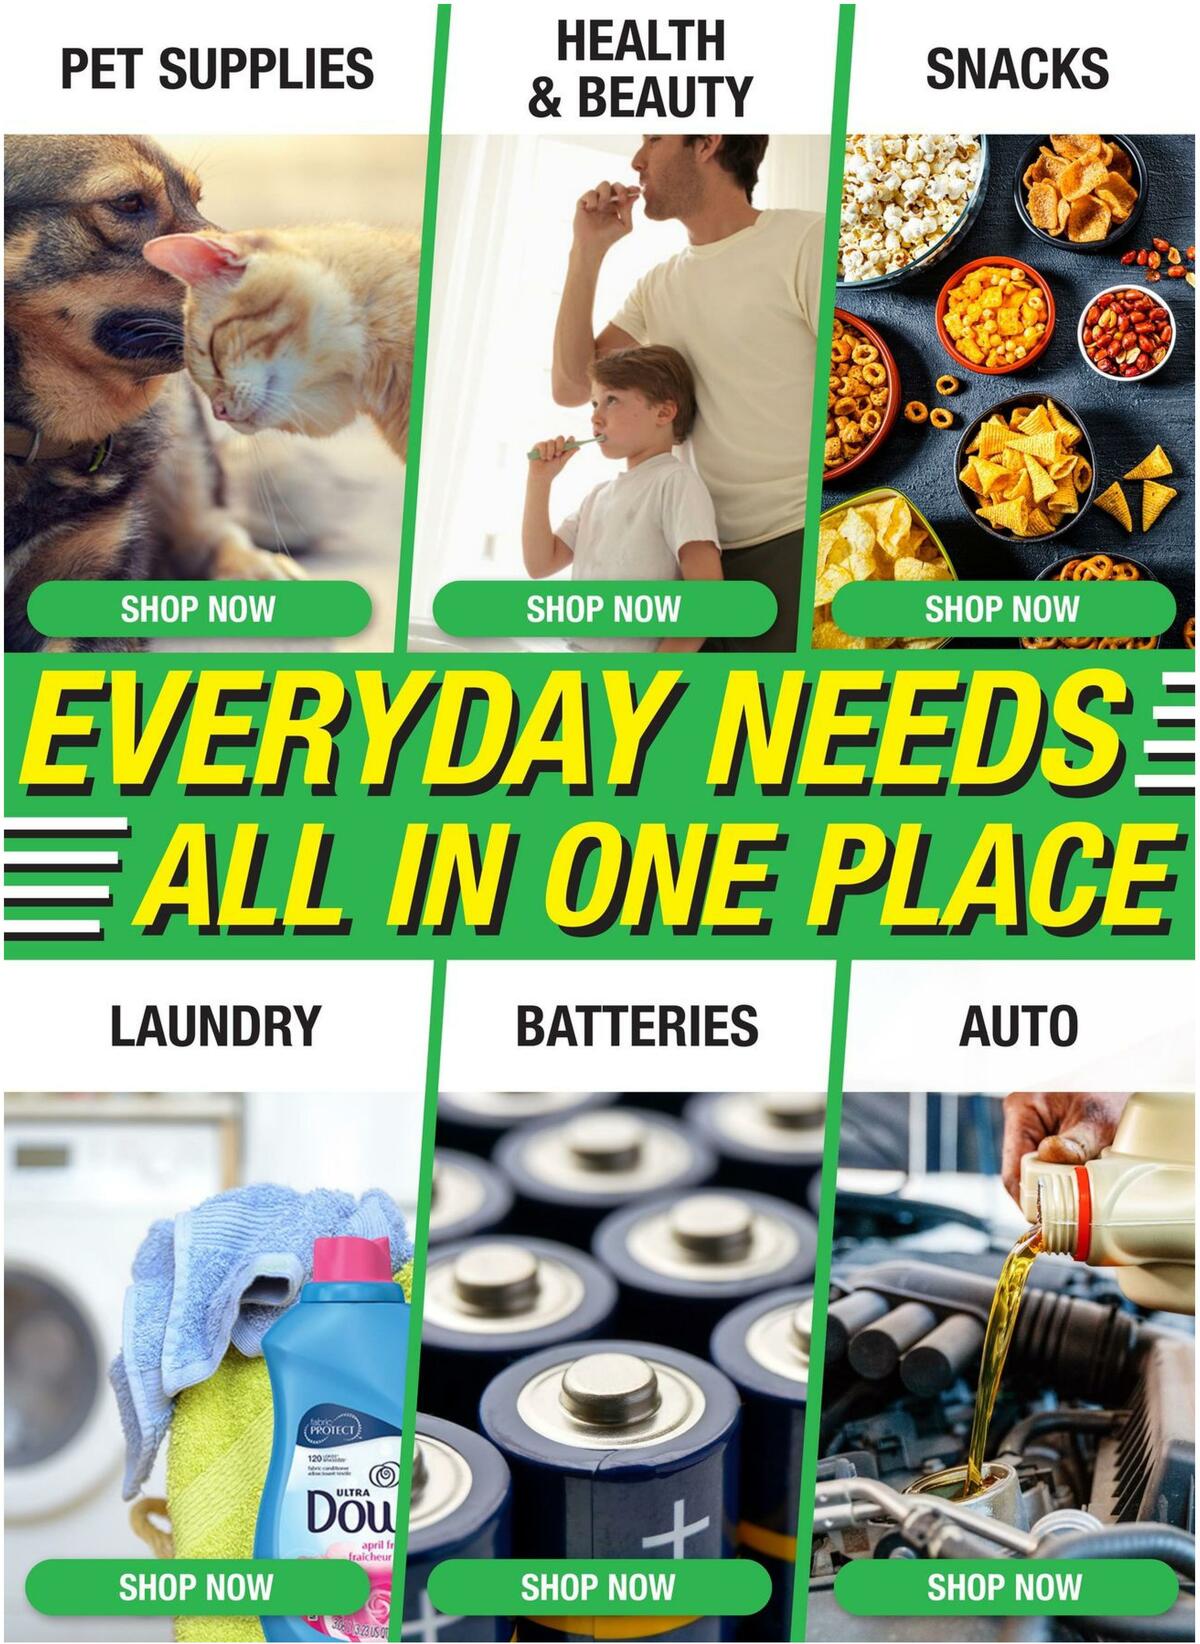 Menards Weekly Ad from February 3